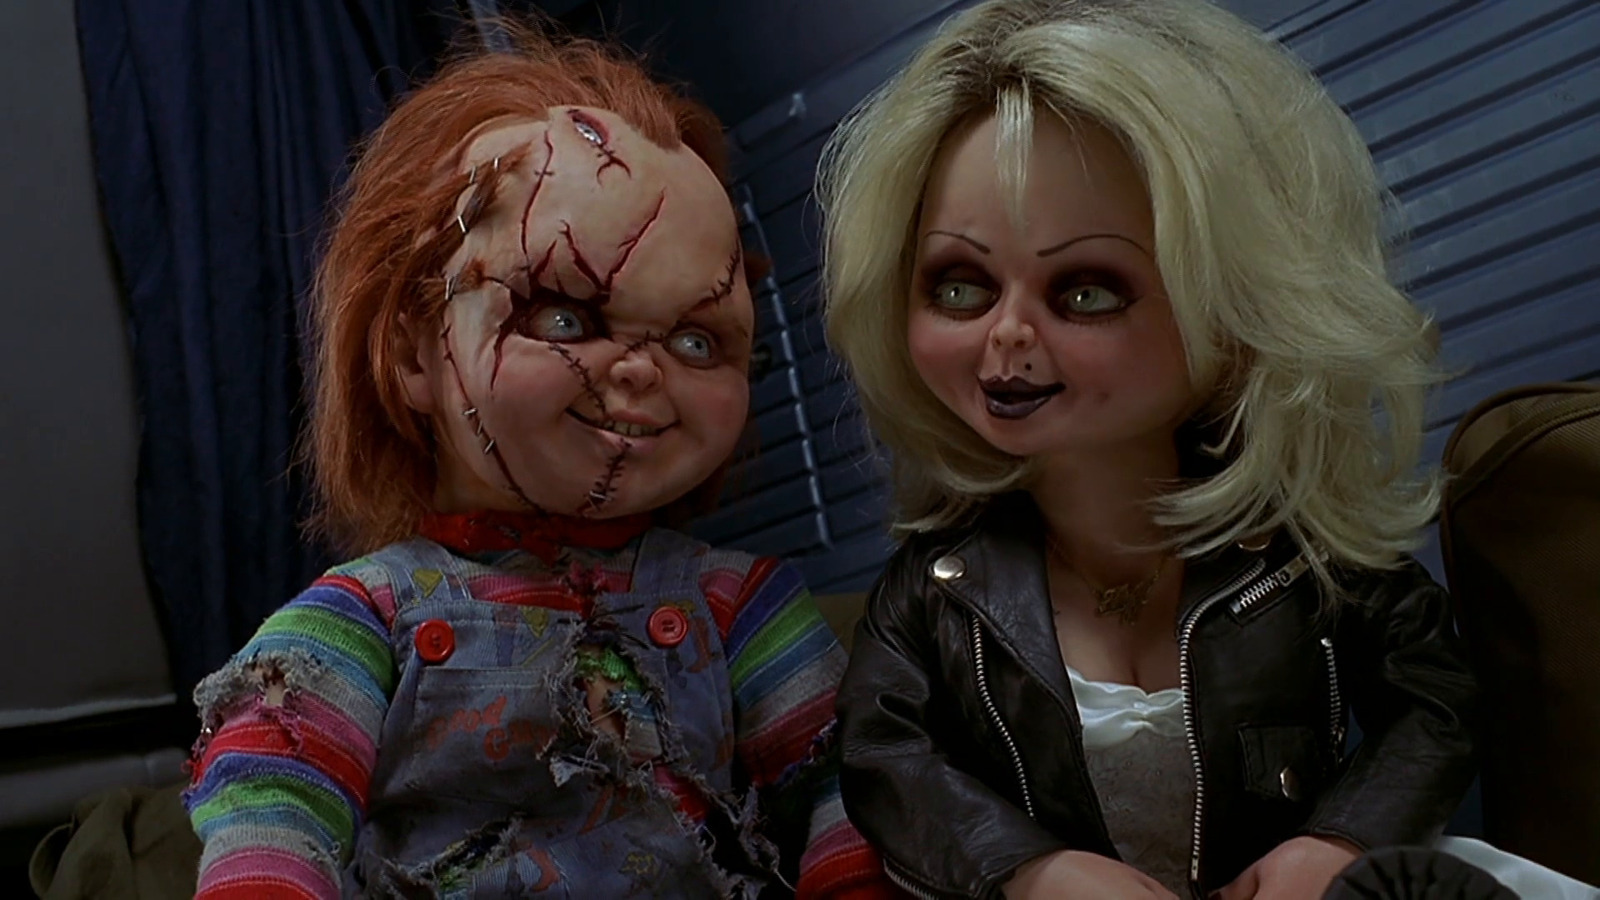 chris aikens recommends tiffany and chucky sex pic